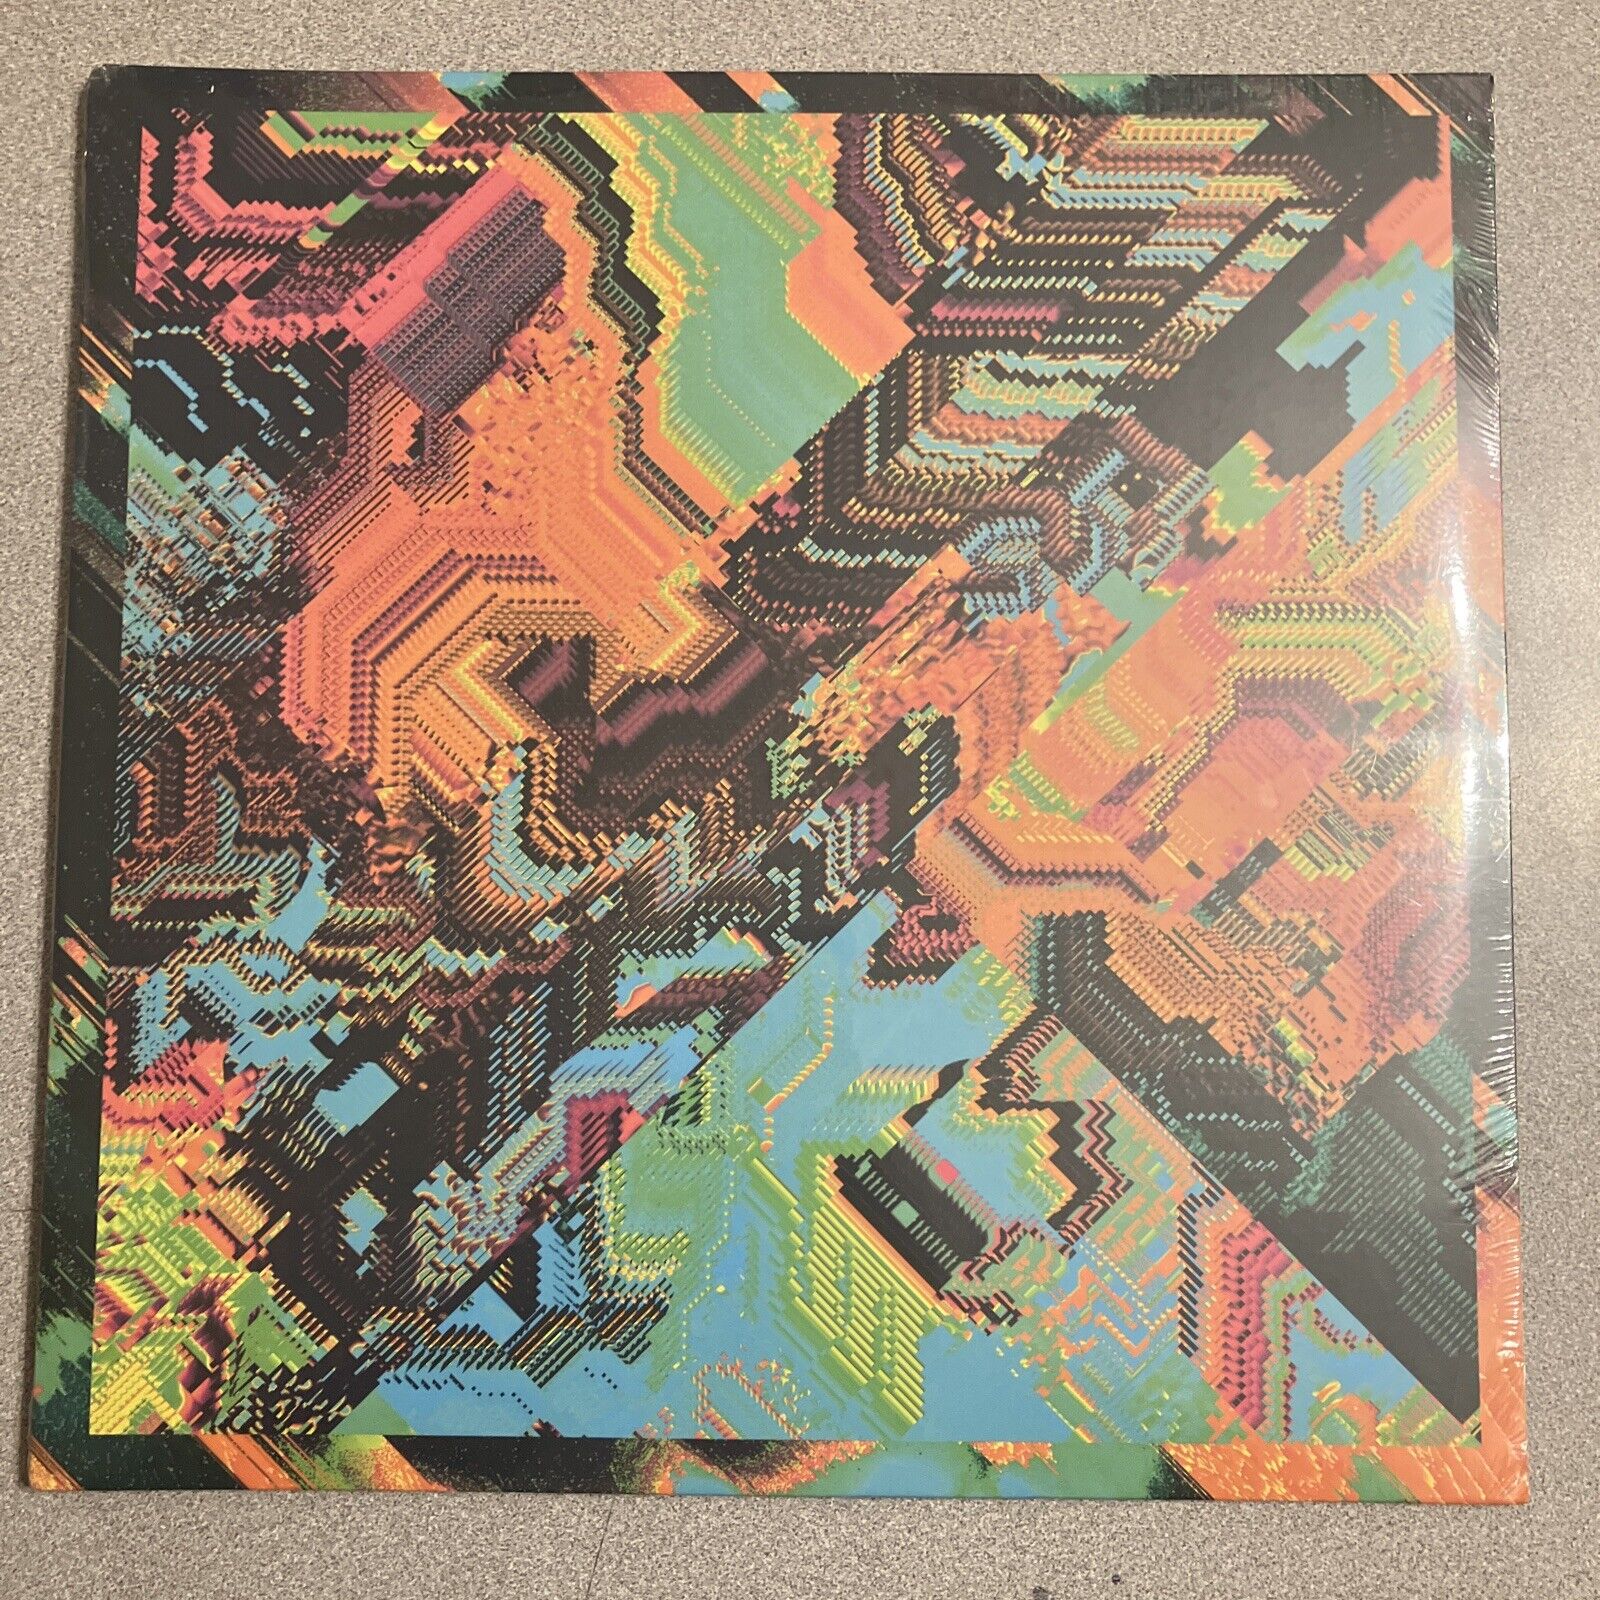 PSYCHEDELIC PORN CRUMPETS Shyga The Sunlight Mound - Colored Vinyl LP